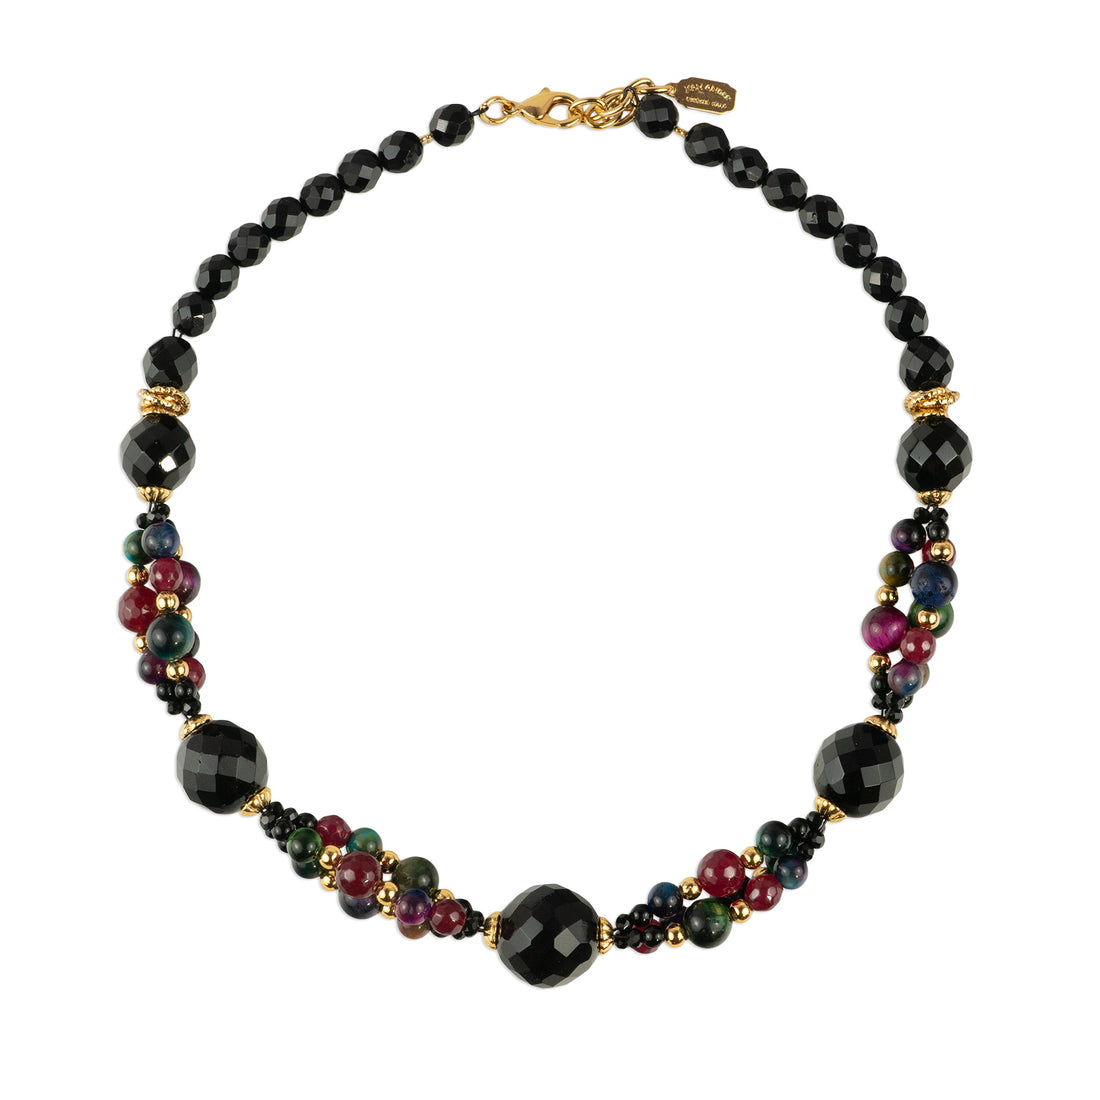 Choker necklace with intertwining of semiprecious stones and crystal